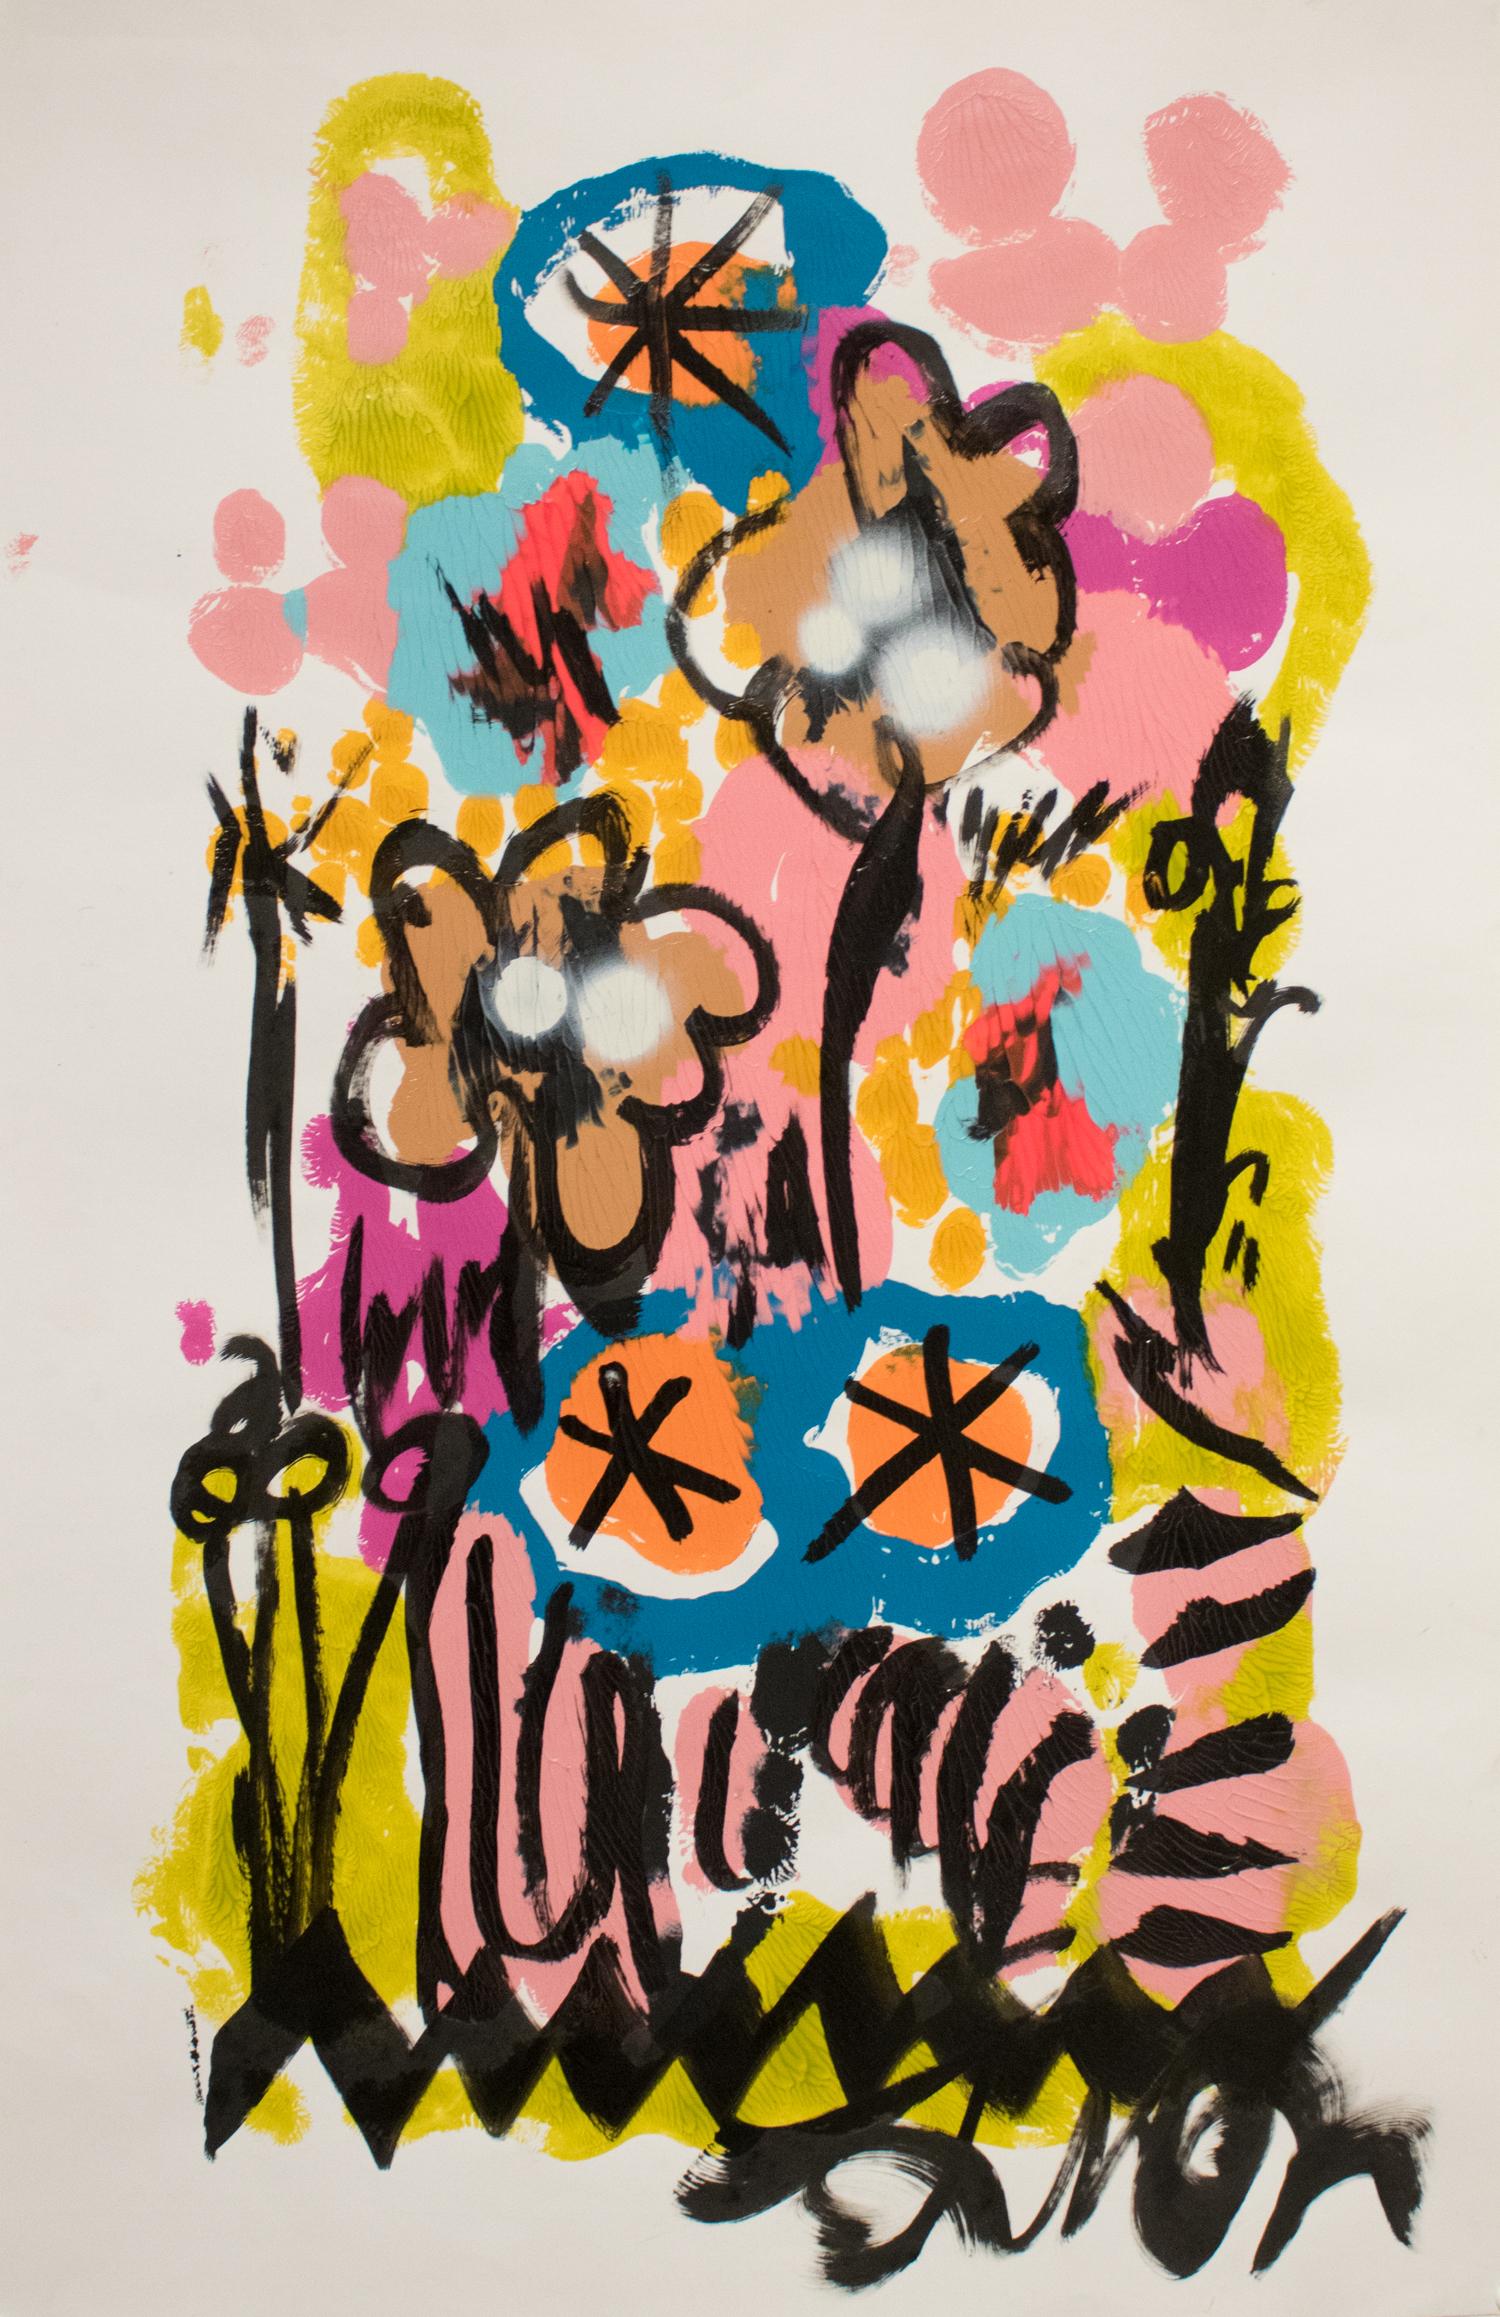 This work by Frances Berry features brightly colored abstract forms and energetic line work representative of floral elements.